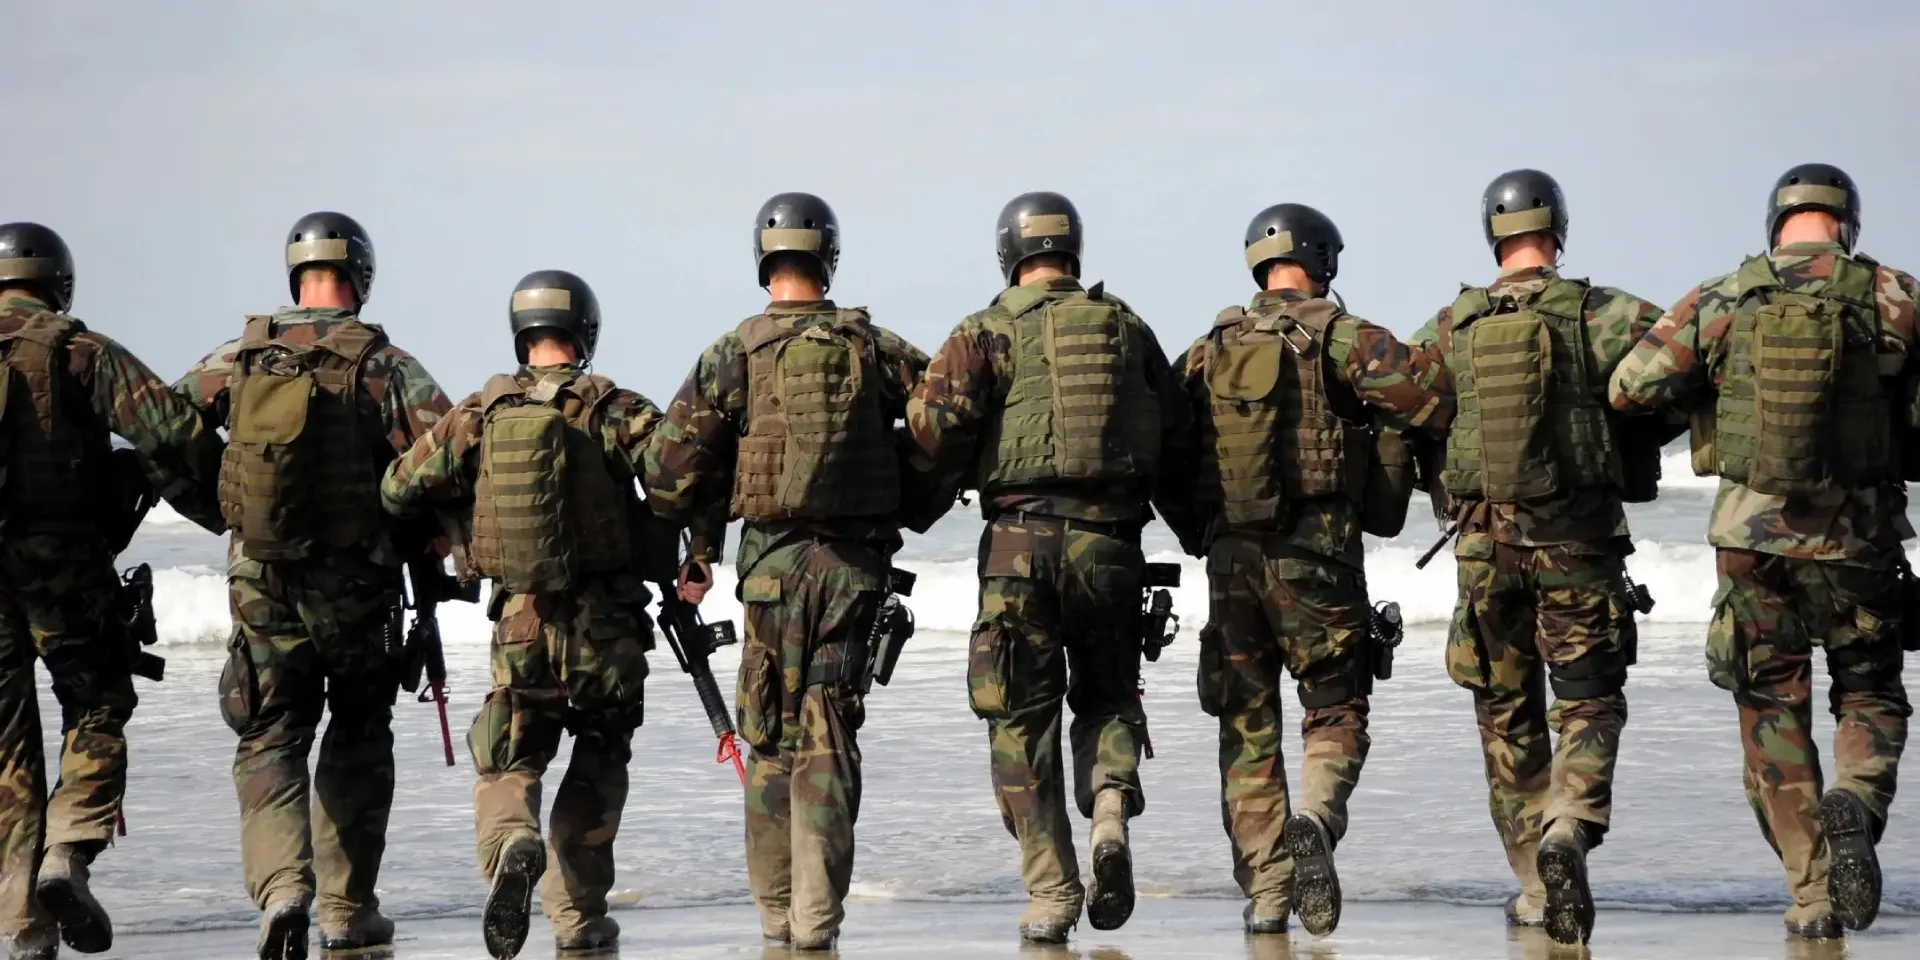 A group of soldiers walking along the beach.